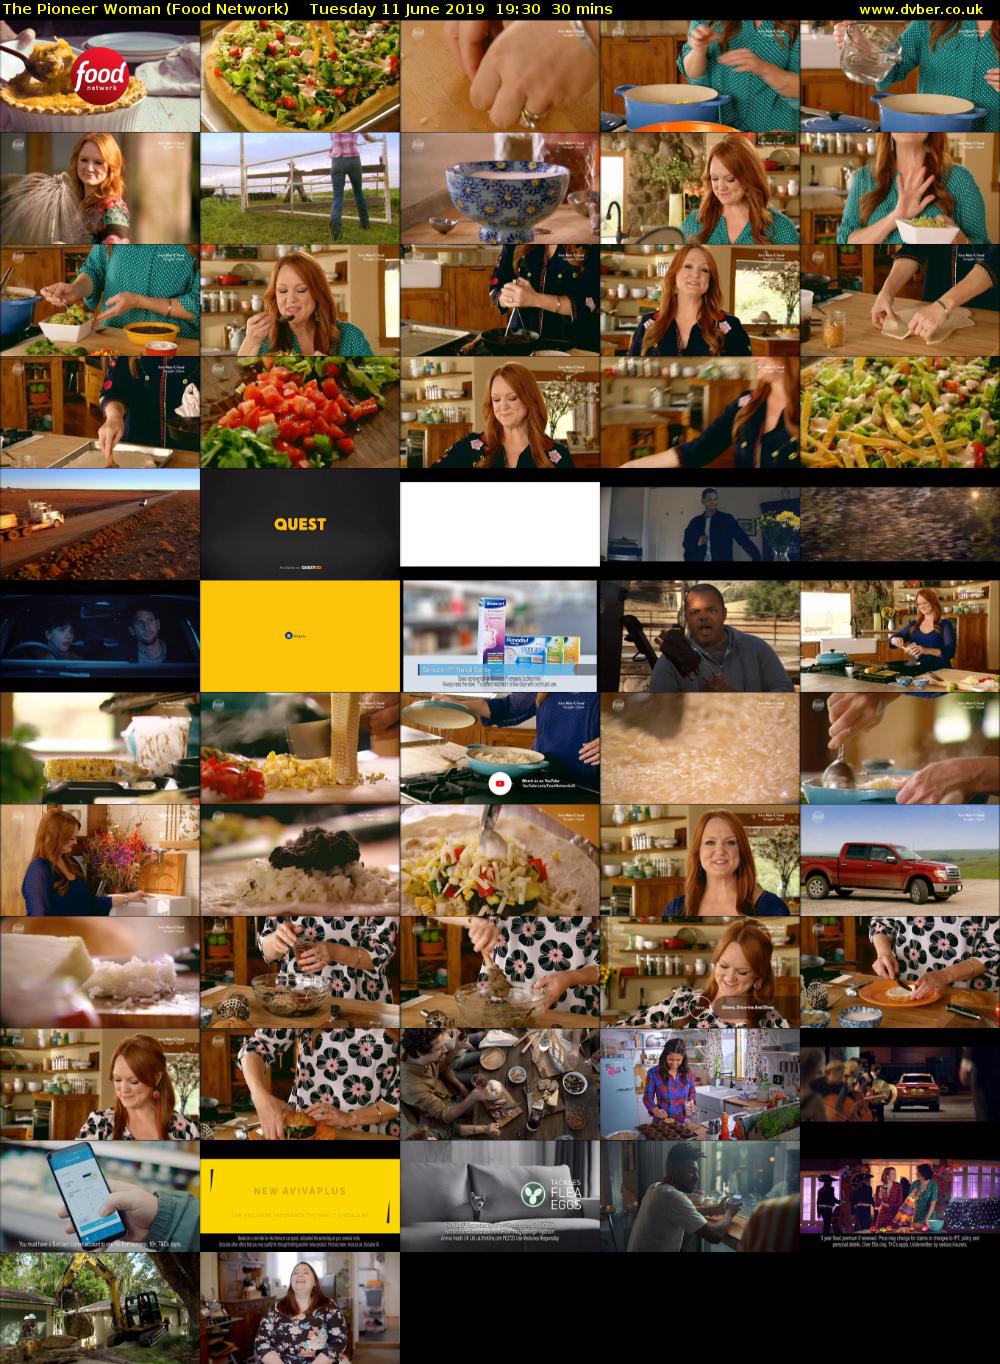 The Pioneer Woman (Food Network) Tuesday 11 June 2019 19:30 - 20:00